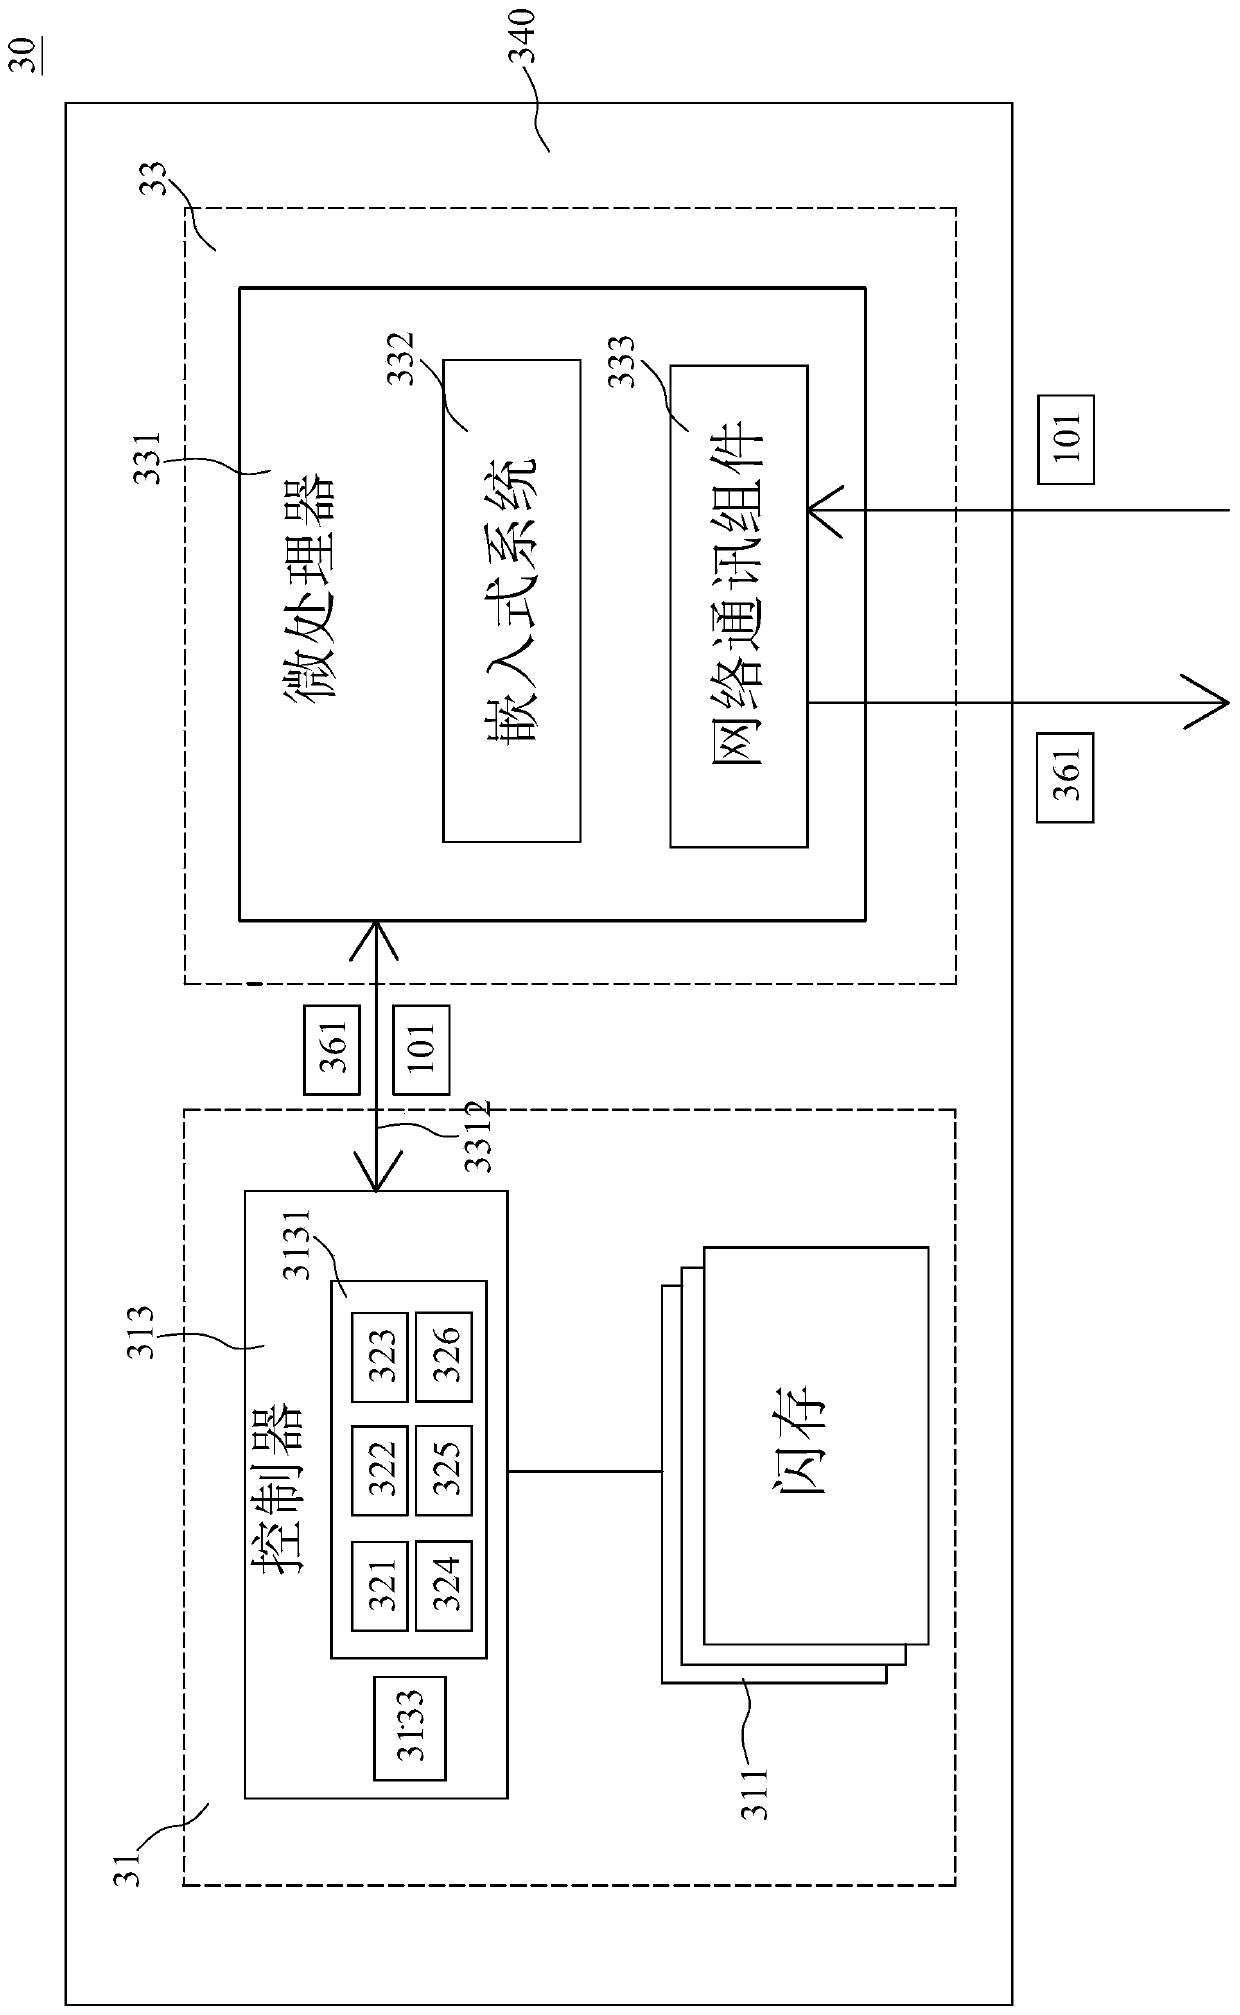 System and method capable of remotely controlling electronic device to execute program